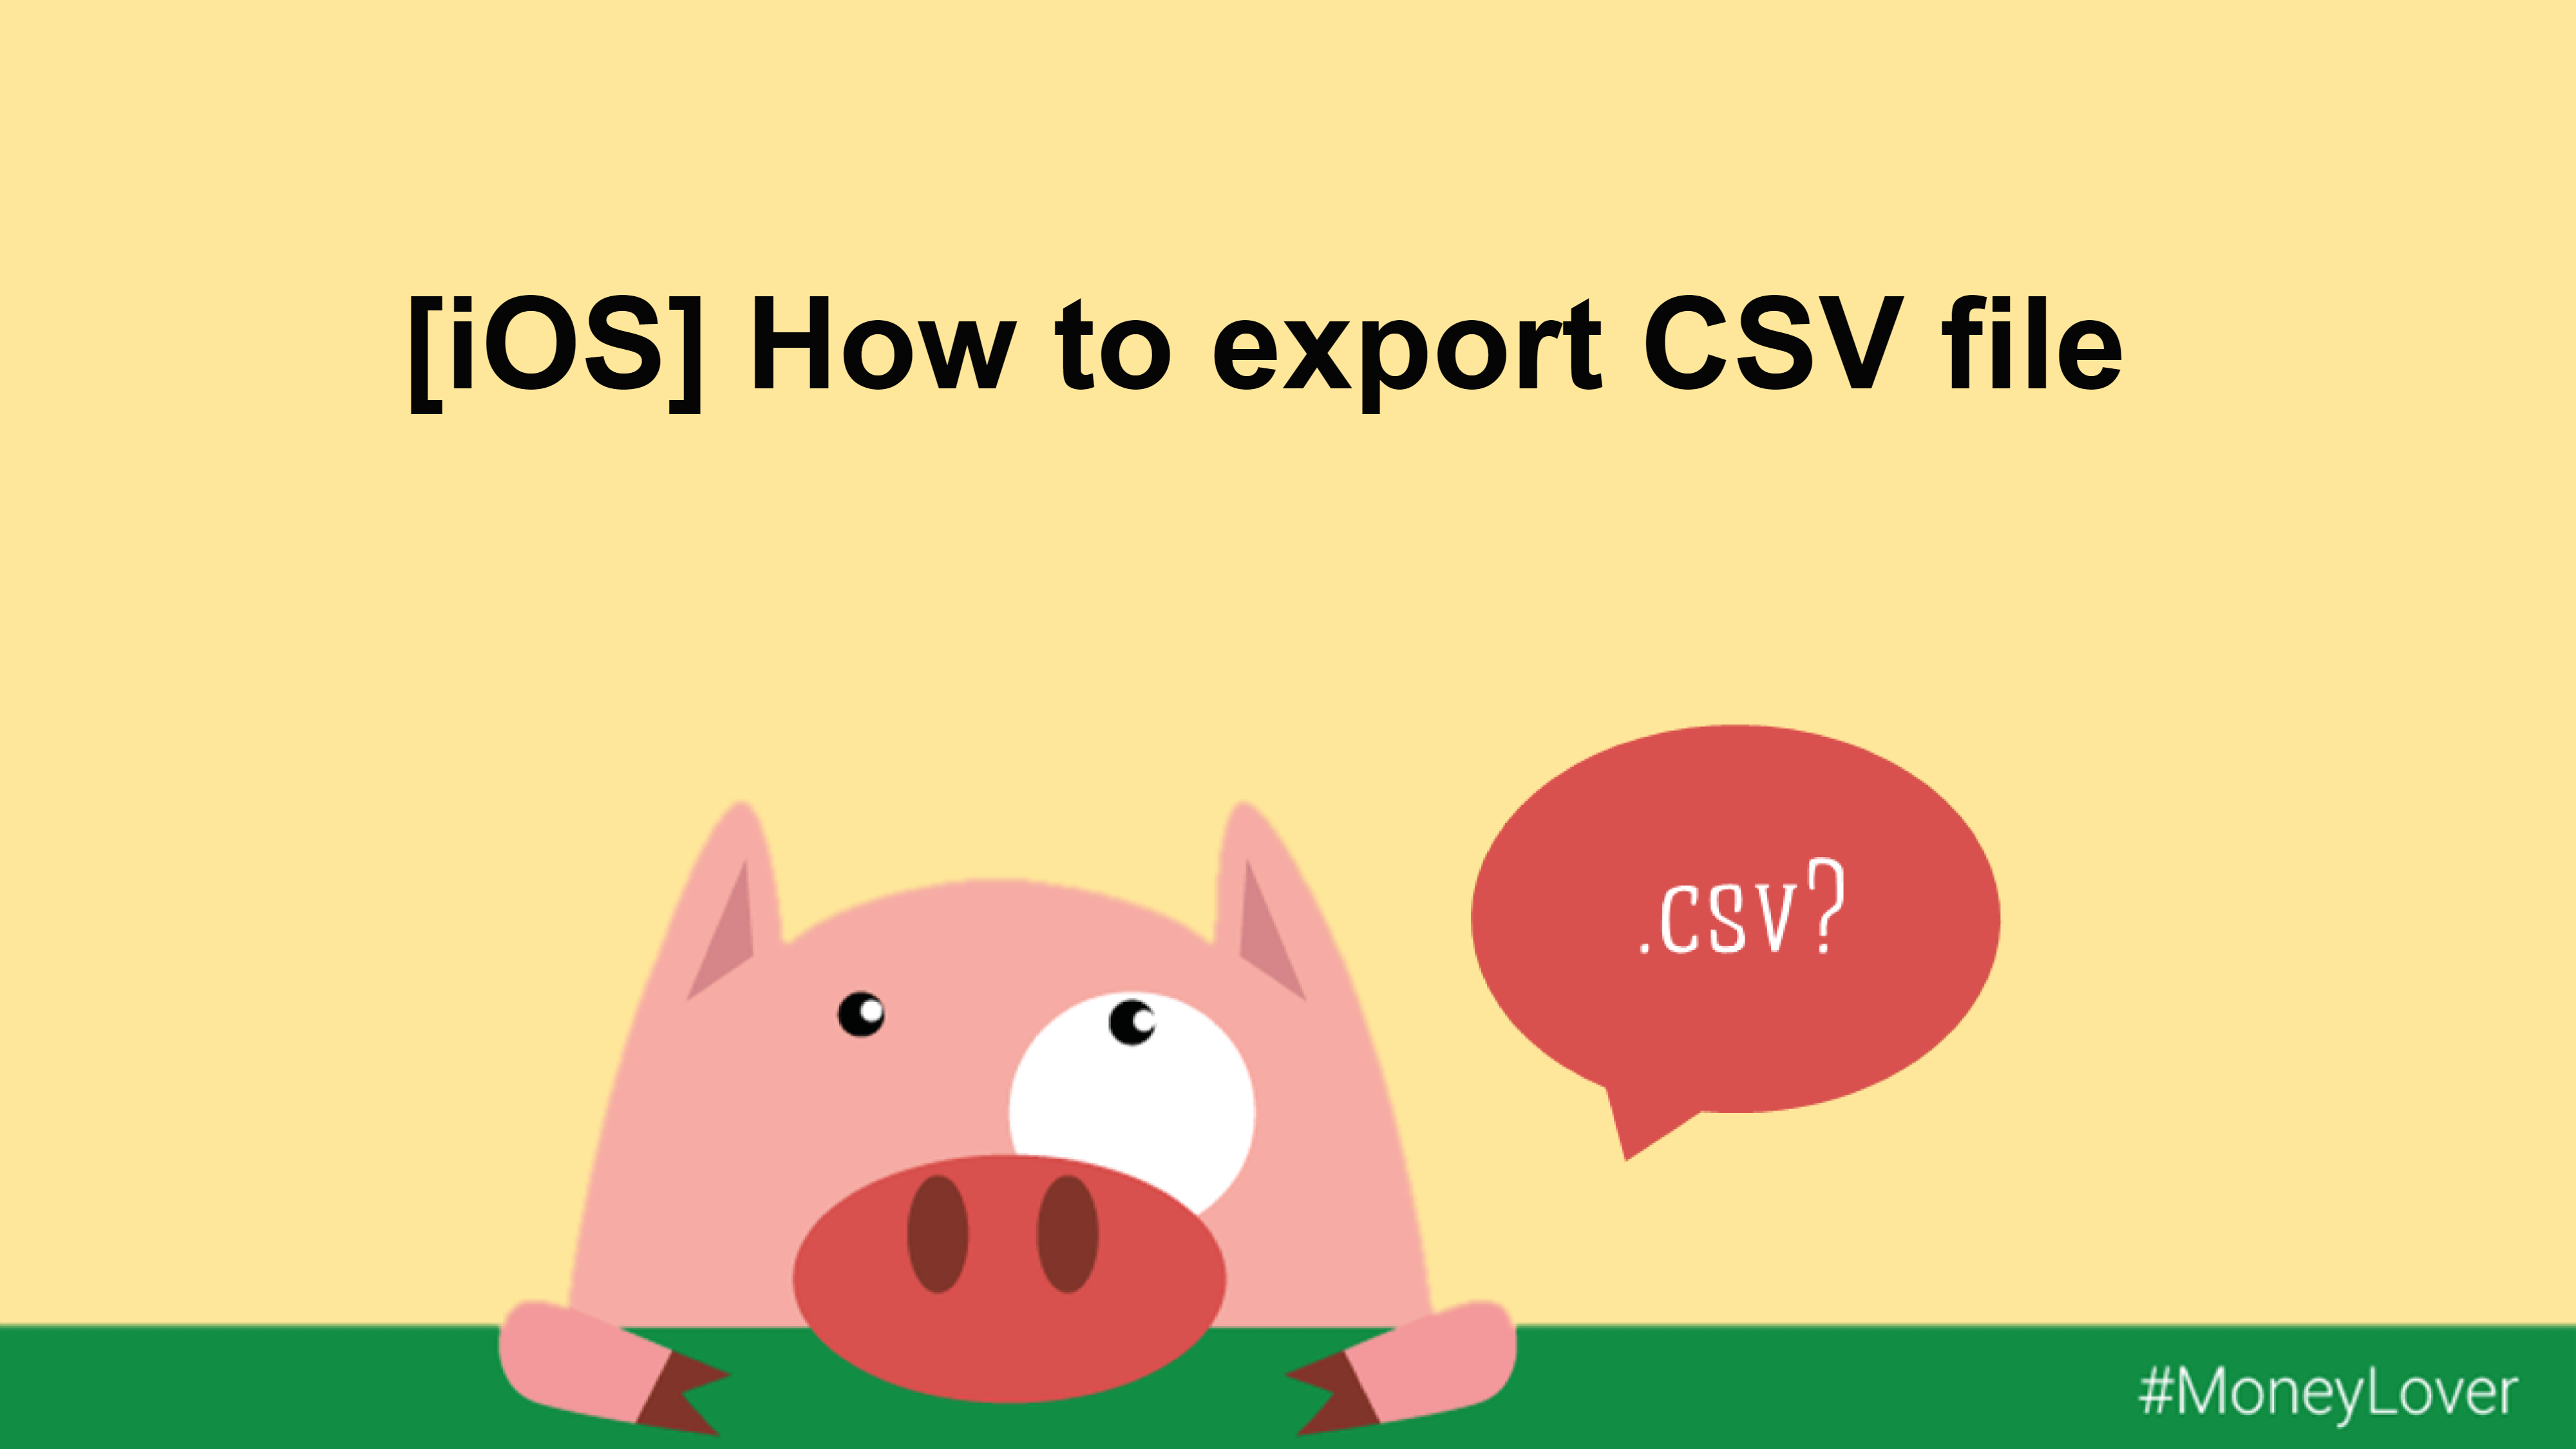 How to export CSV file?